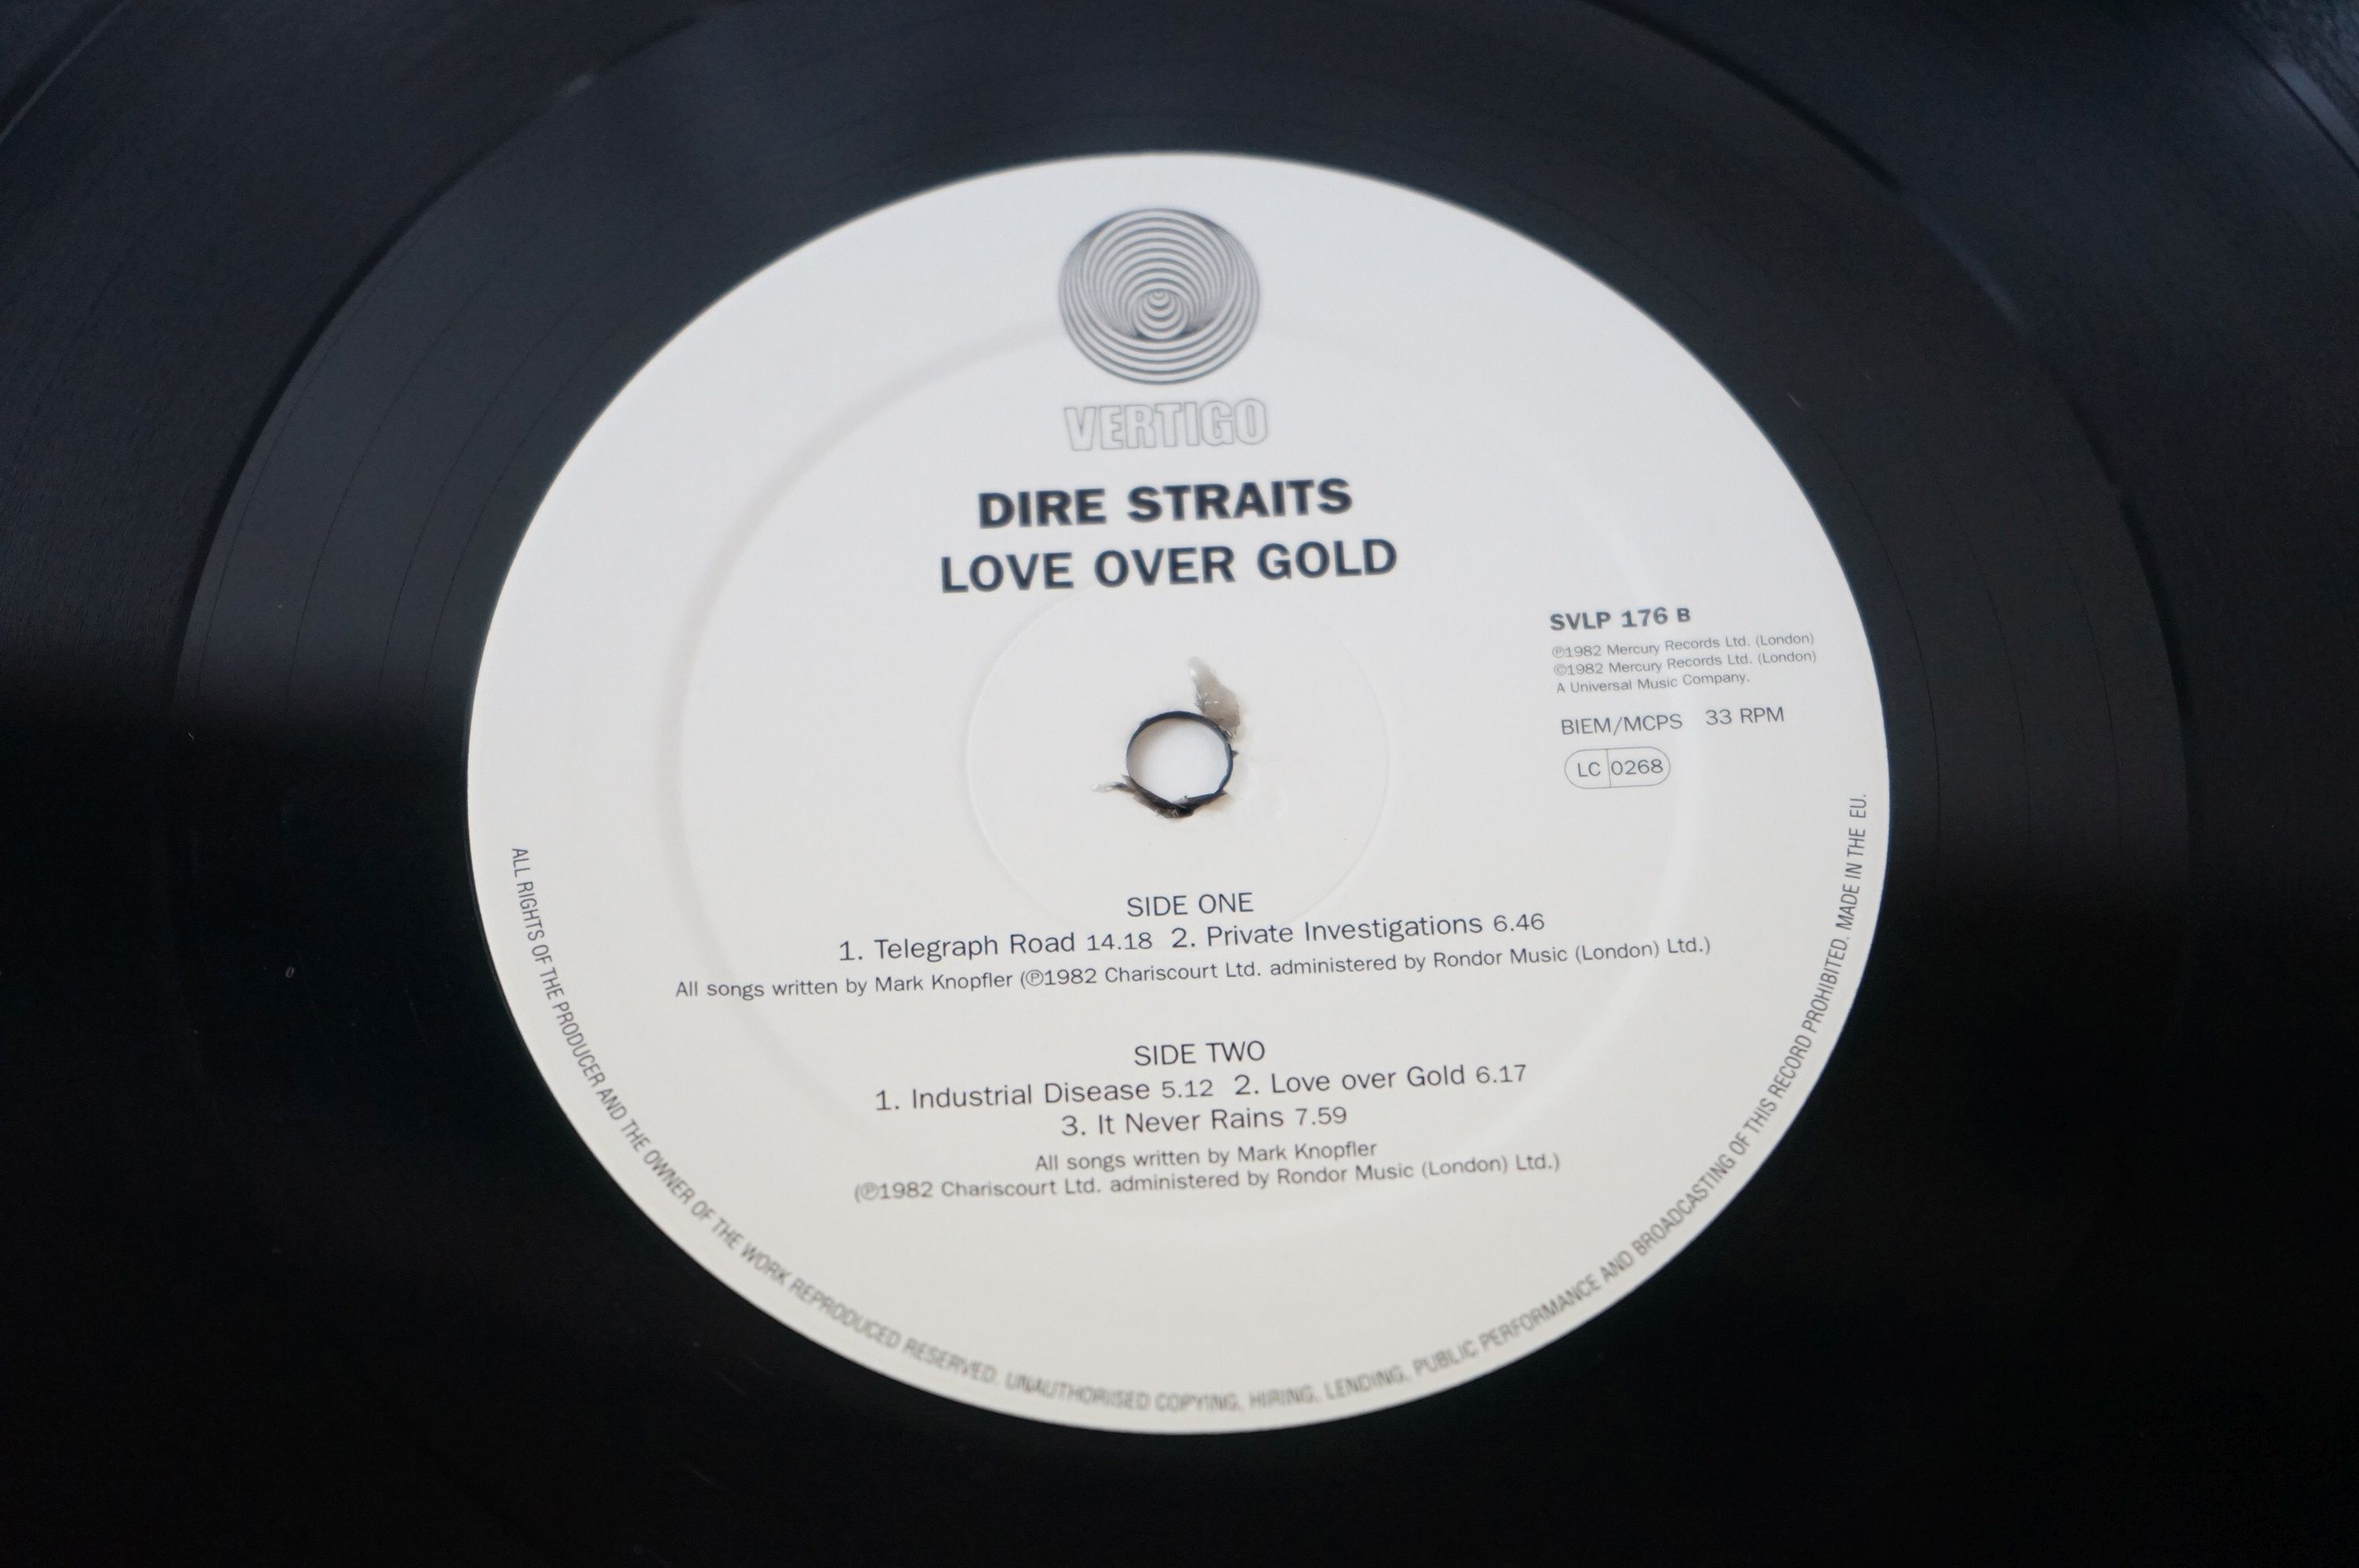 Vinyl - Dire Straits 3 LP's to include Brothers In Arms (Warner Bros 49377-1) Love Over Gold ( - Image 9 of 13